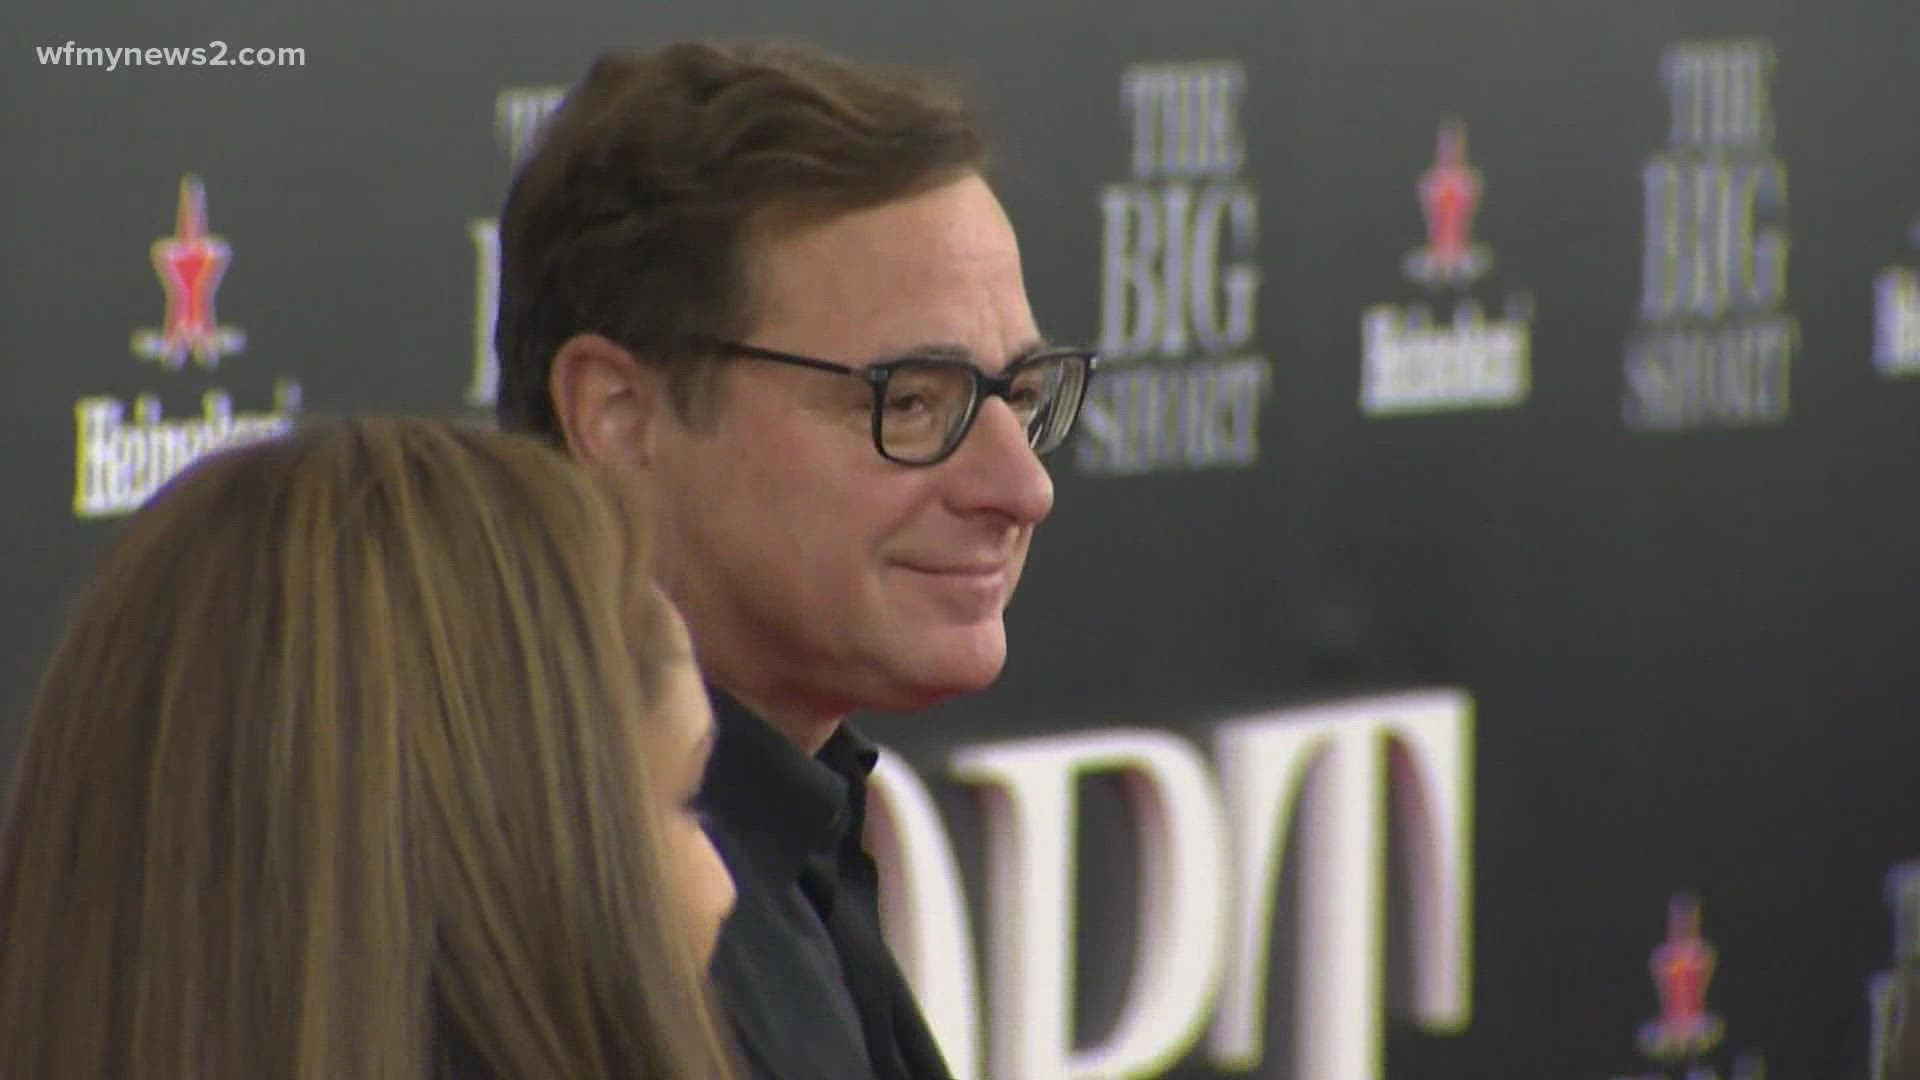 Fans of actor and comedian Bob Saget are posting their condolences online. It turns out grieving someone you don't know, is actually perfectly human.